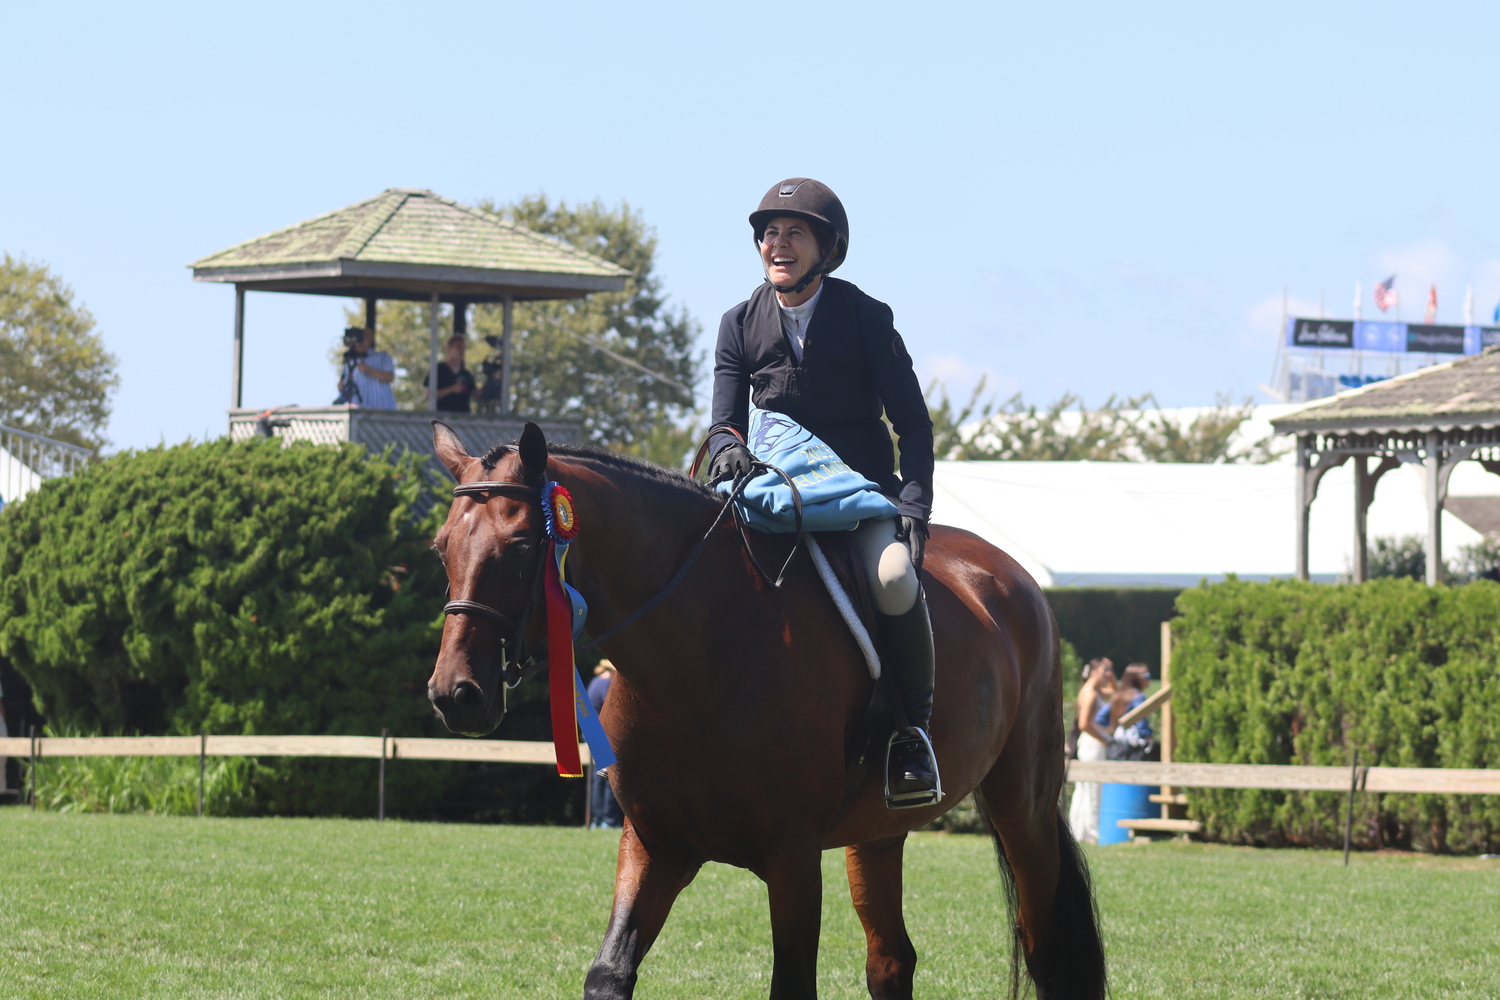 Cindy Sulzberger and her horse, Coeur de Leon, were champions in the local amateur owner hunter division. CAILIN RILEY